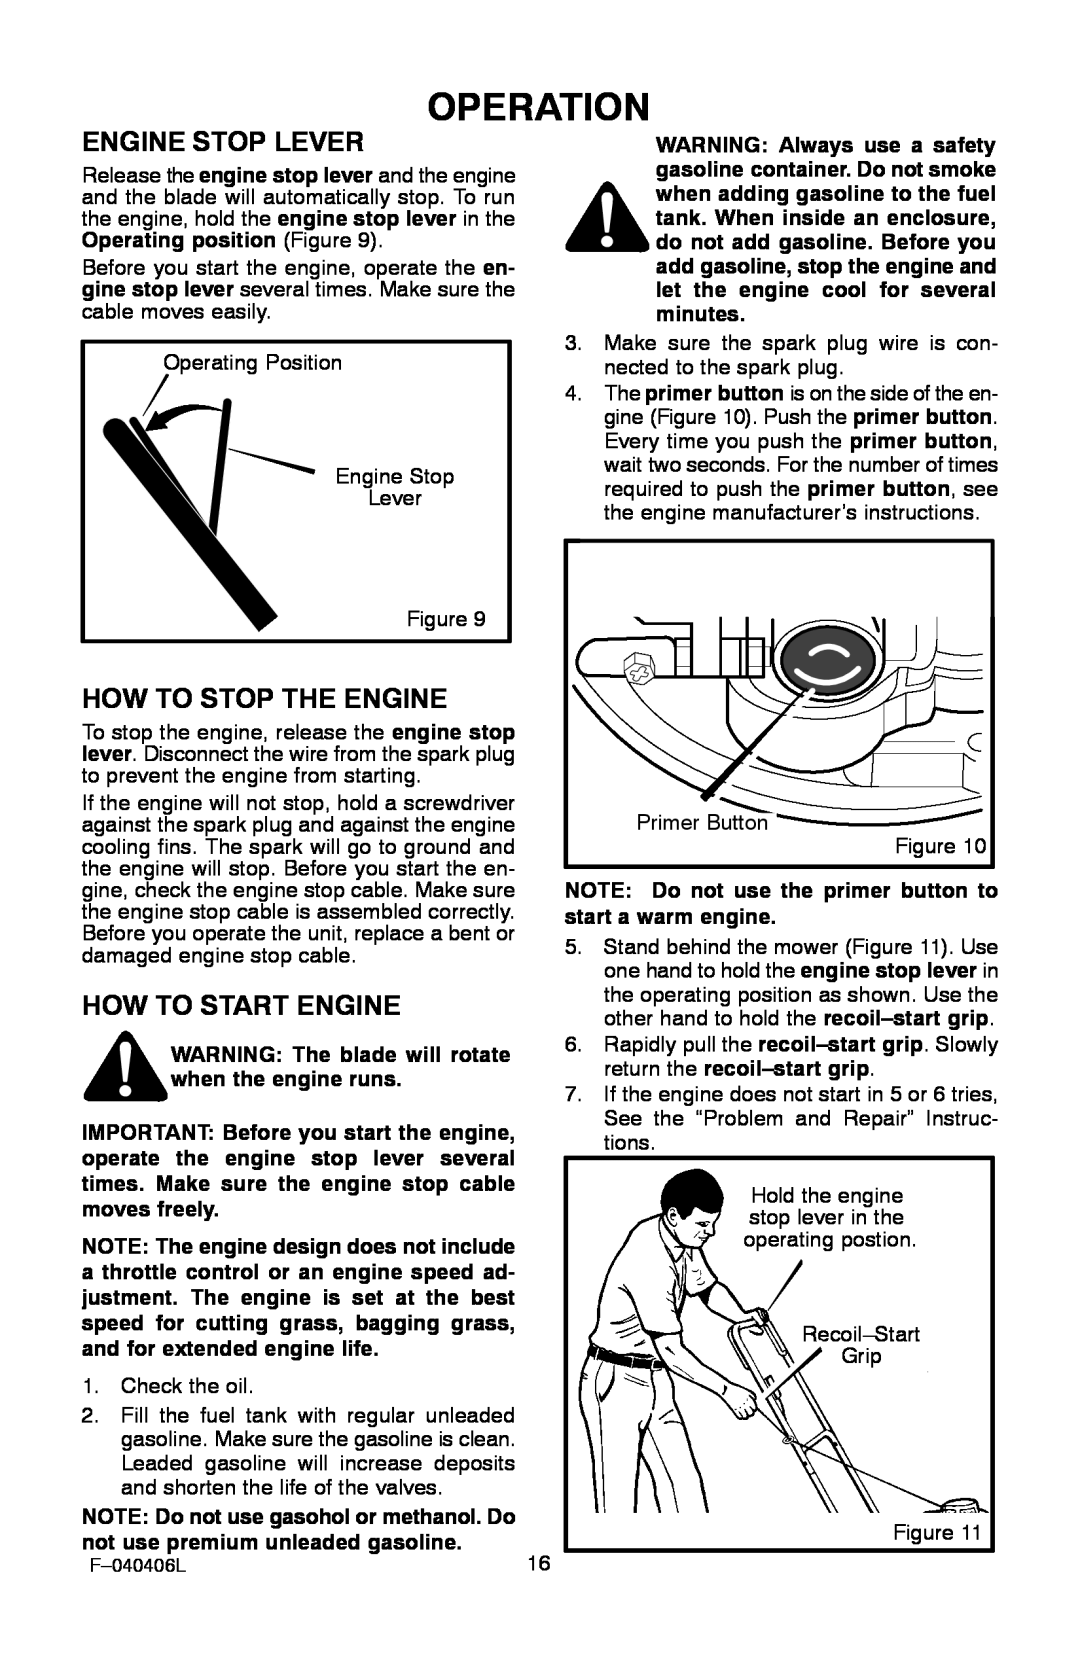 Murray 20-inch manual Operation, Engine Stop Lever, How To Stop The Engine, How To Start Engine 